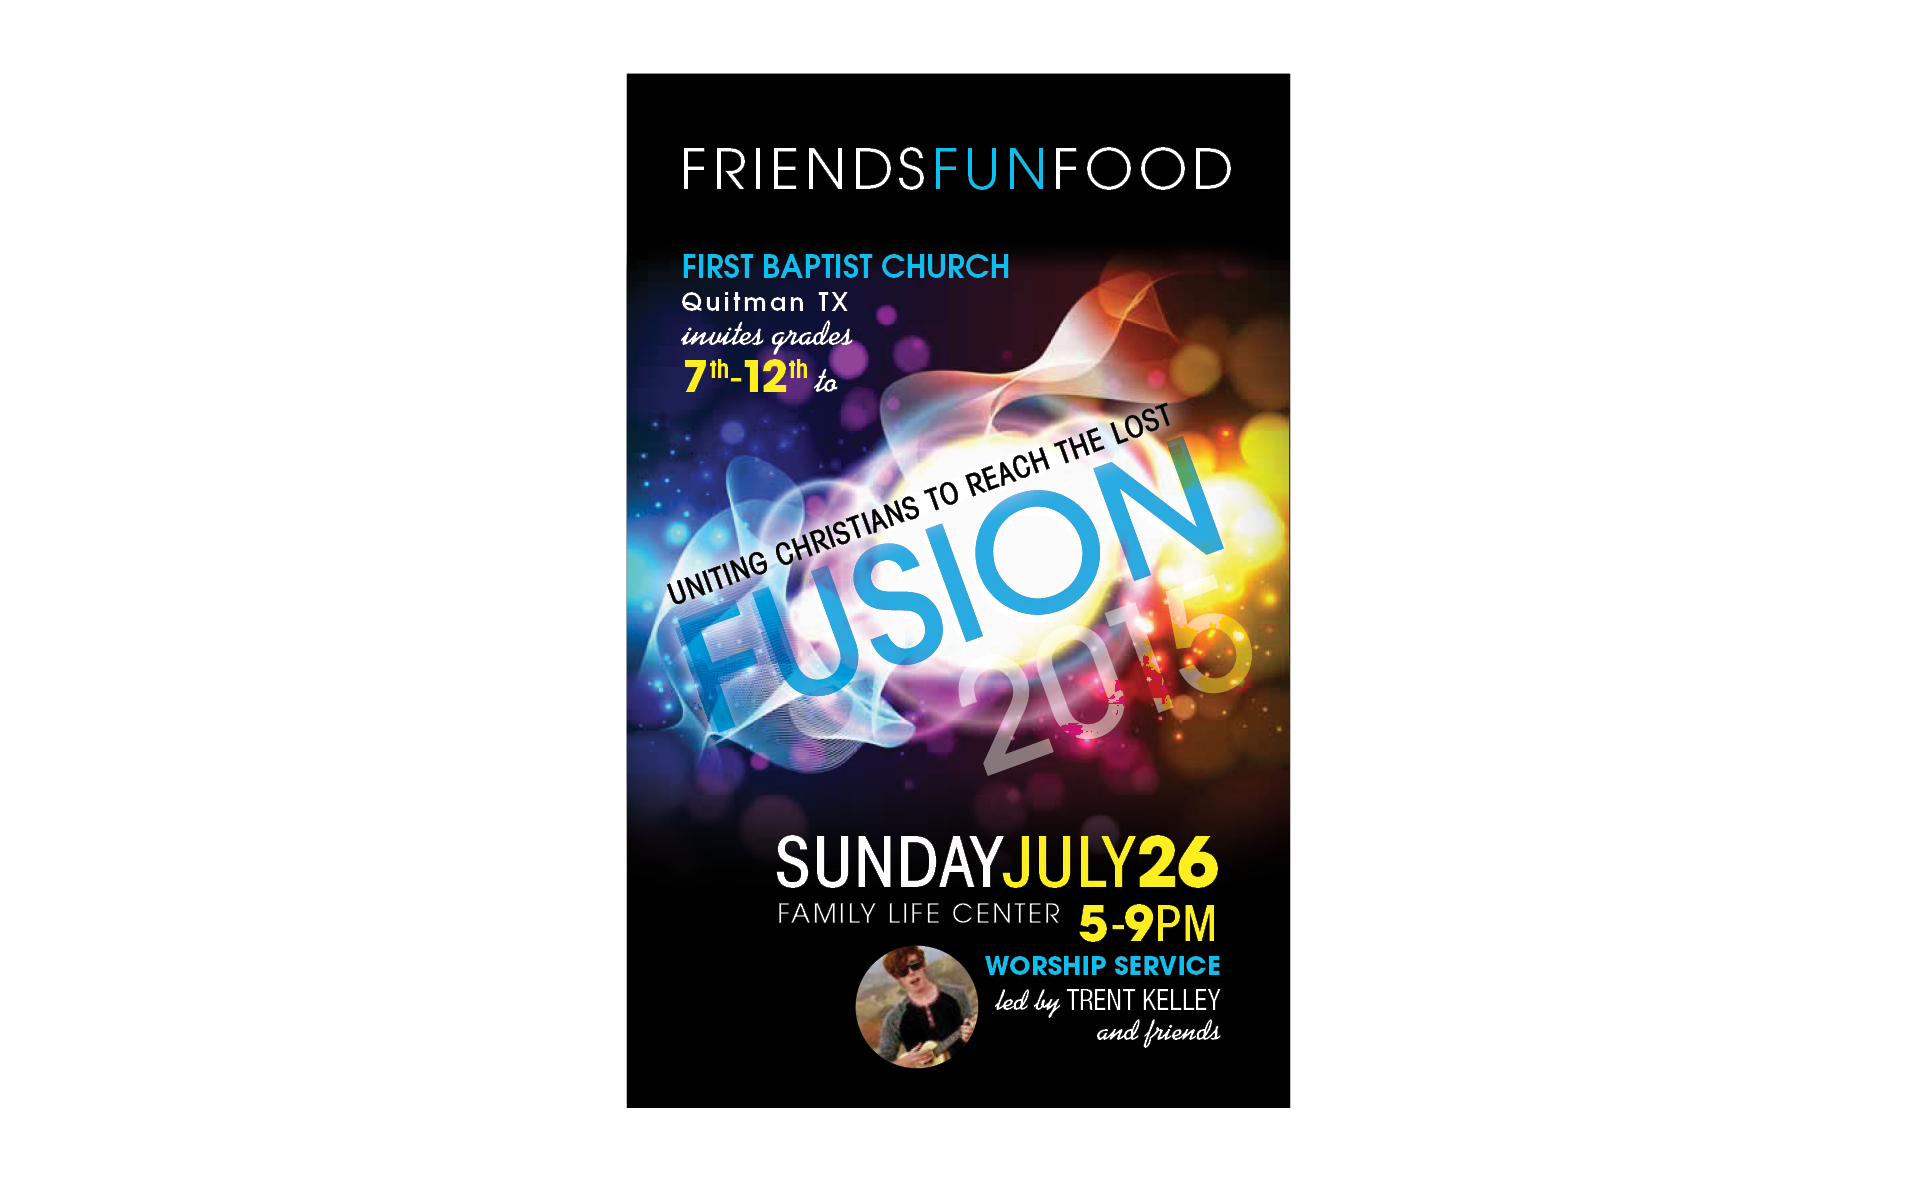 FUSION YOUTH EVENT fbcq.org